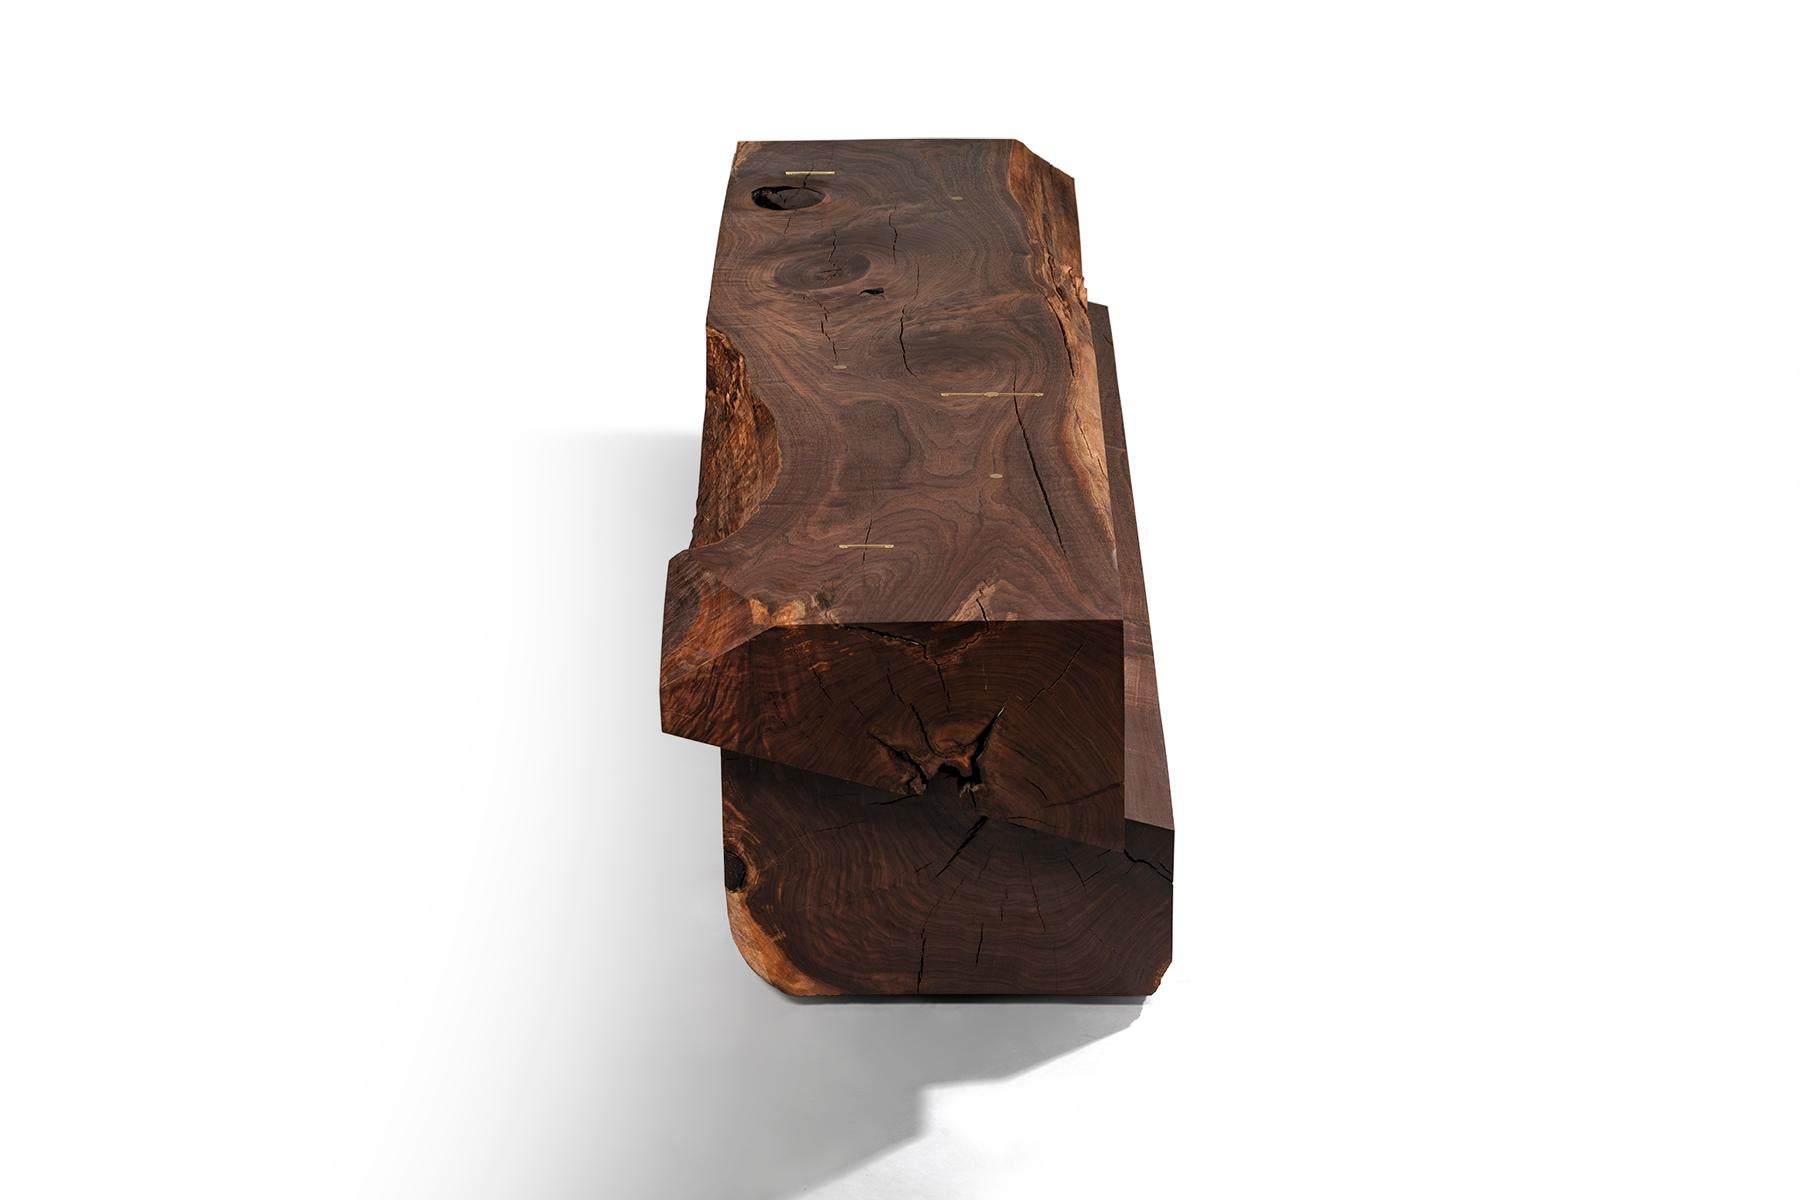 In the largest piece in the Strike/Slip series by Taylor Donsker, a massive block of solid Black Walnut is sawn and then rejoined into a single, shifted beam. Marbled grain and natural edges roll across the surfaces while Taylor's signature polished